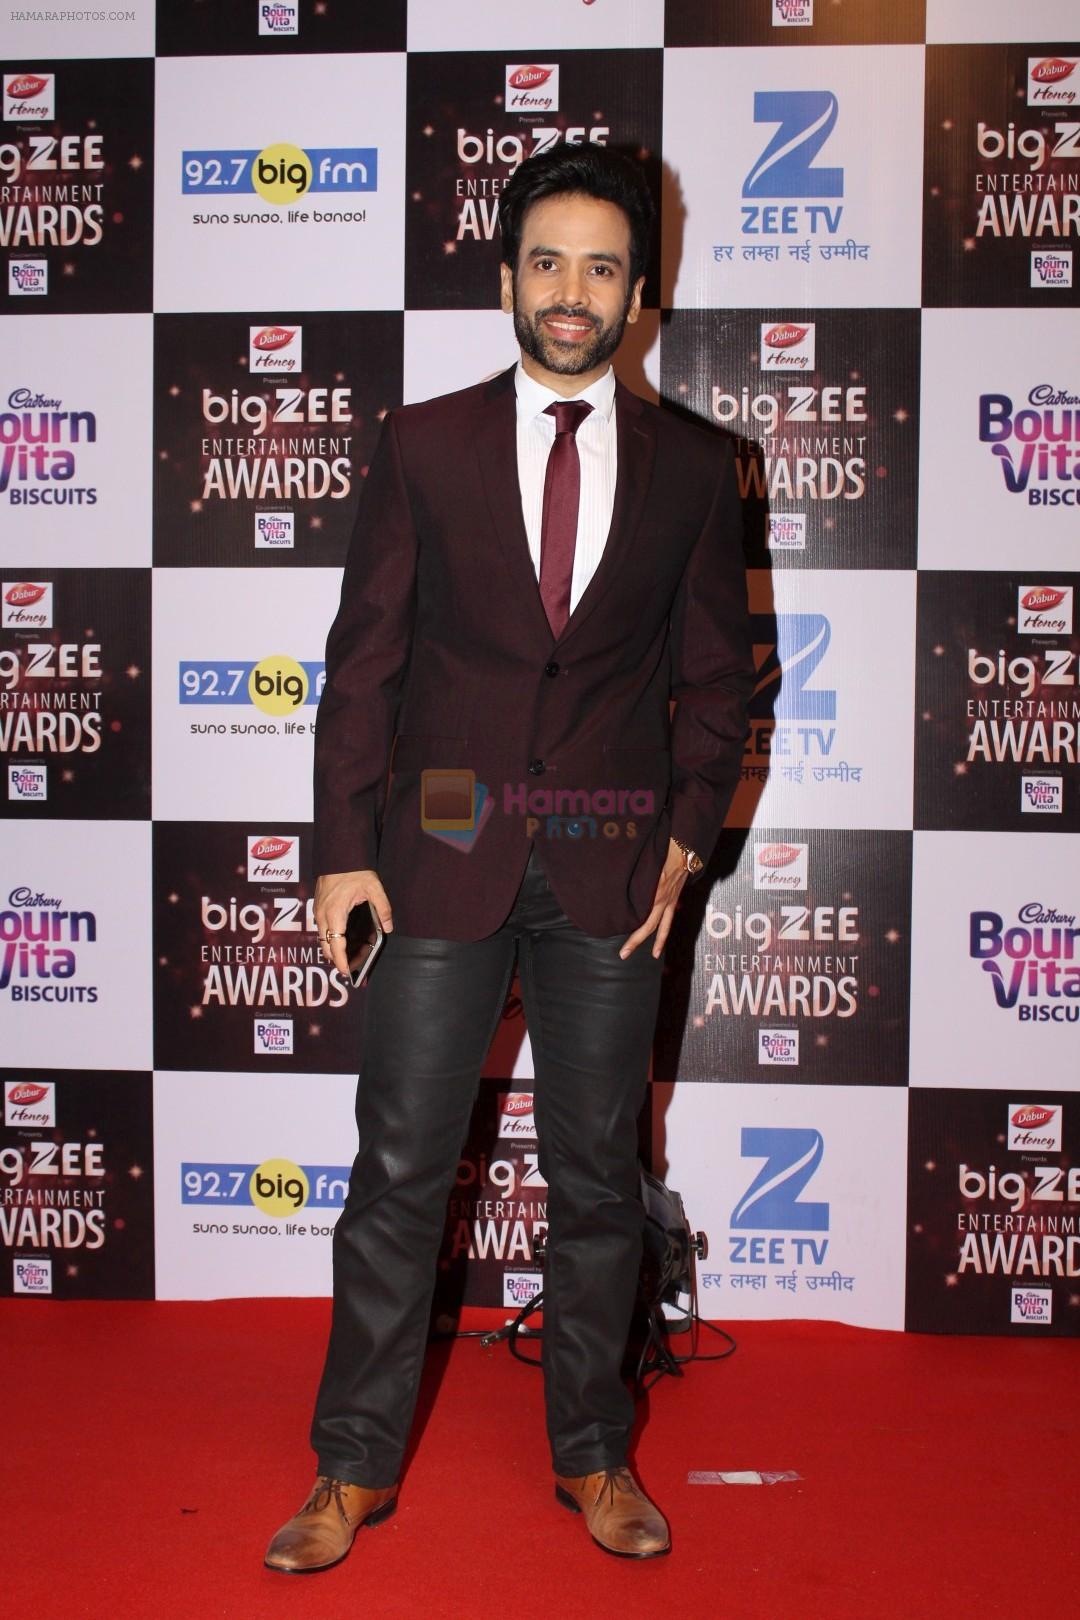 Tusshar Kapoor At Red Carpet Of Big Zee Entertainment Awards 2017 on 29th July 2017